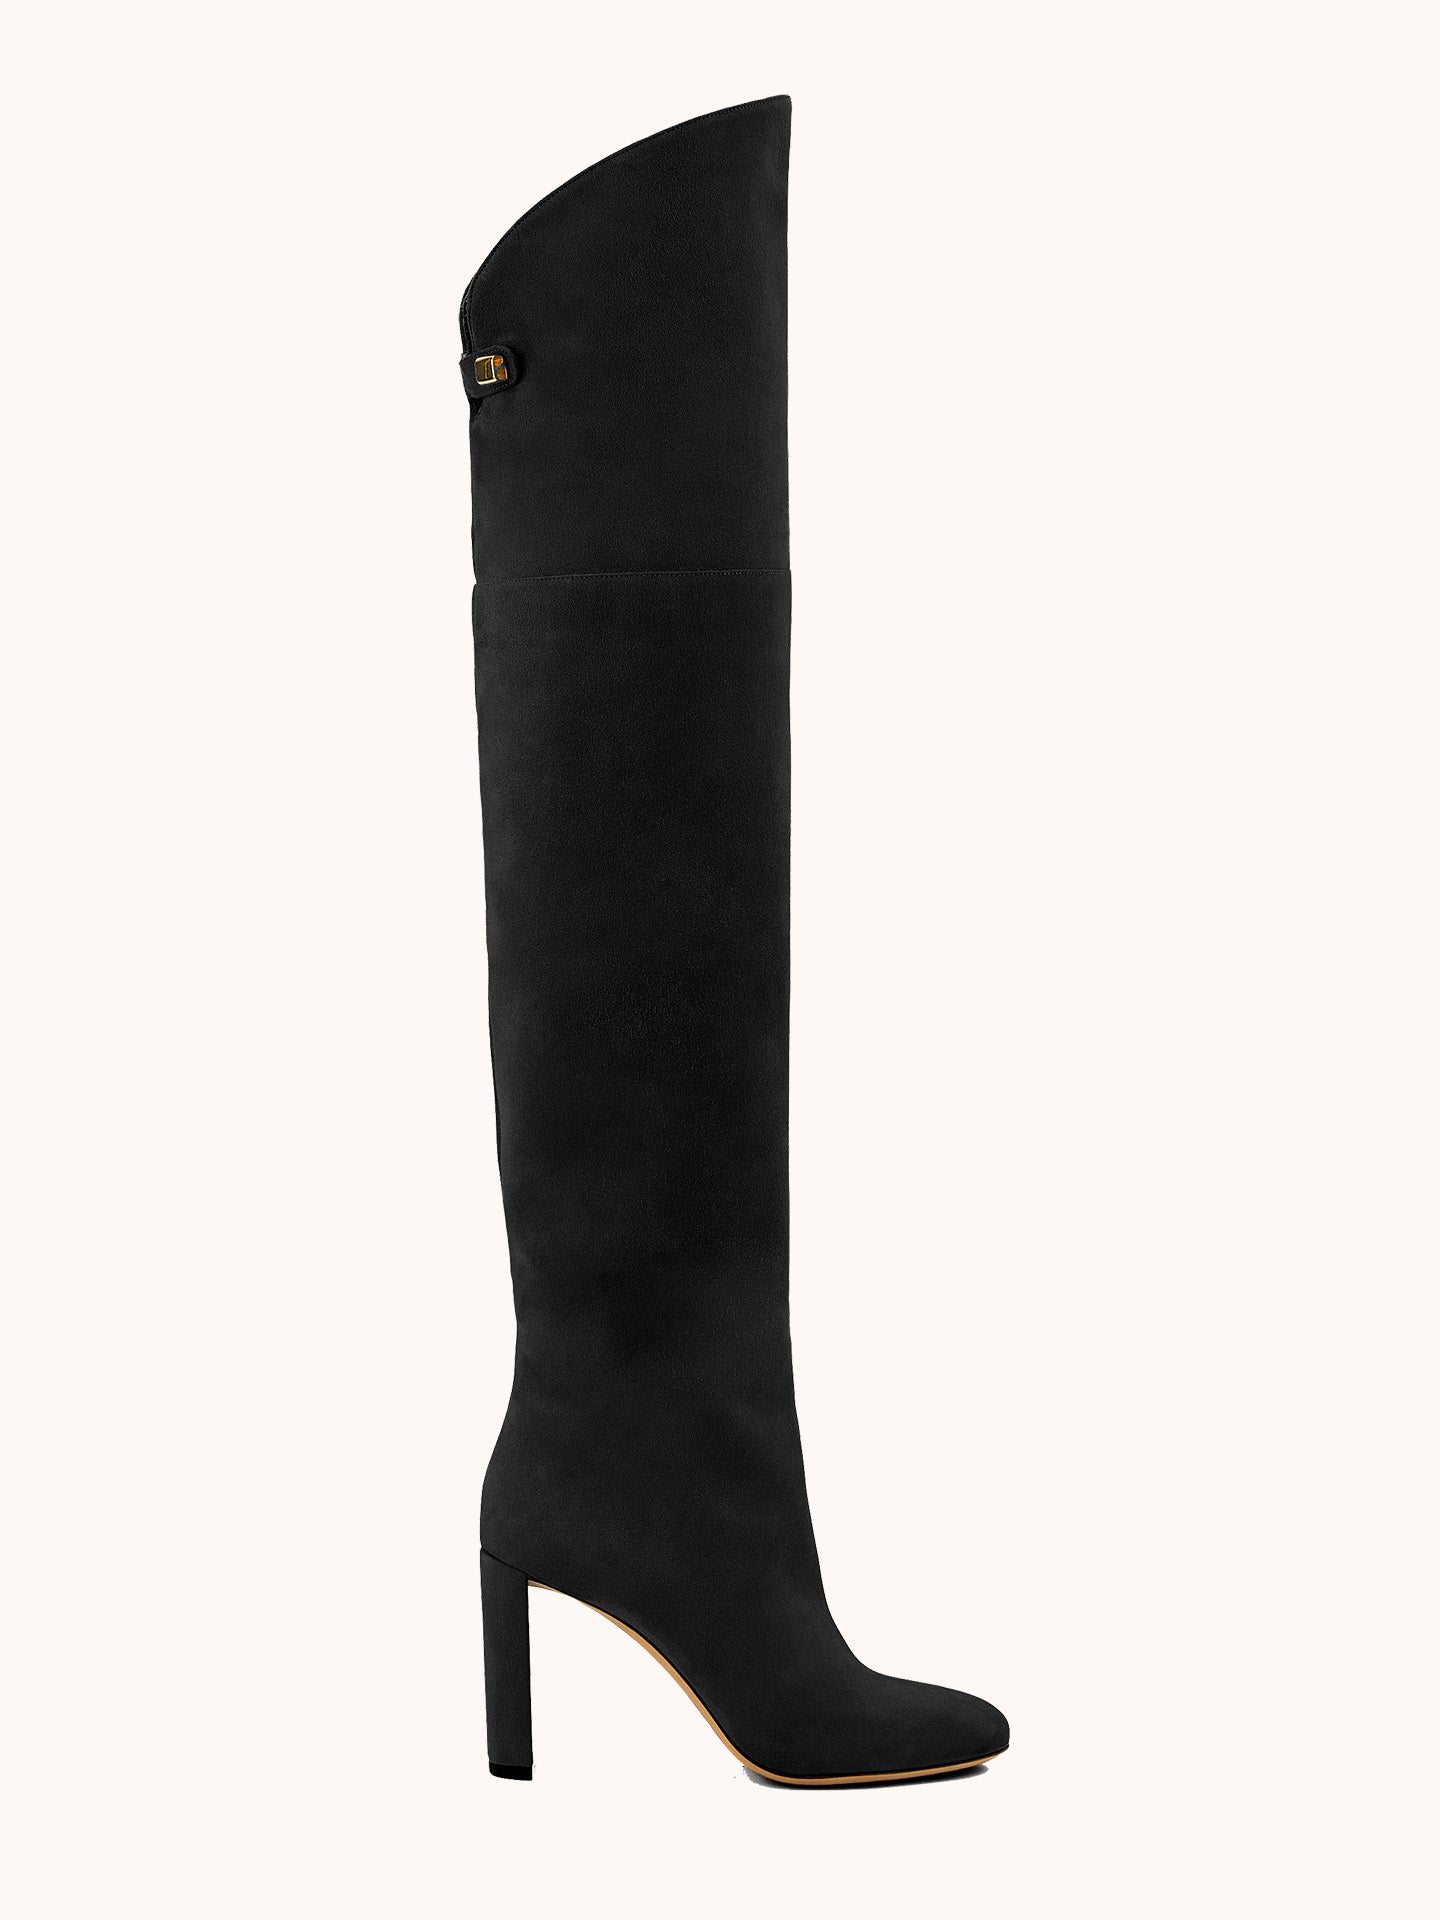 Marylin Over The Knee Black Suede Boots